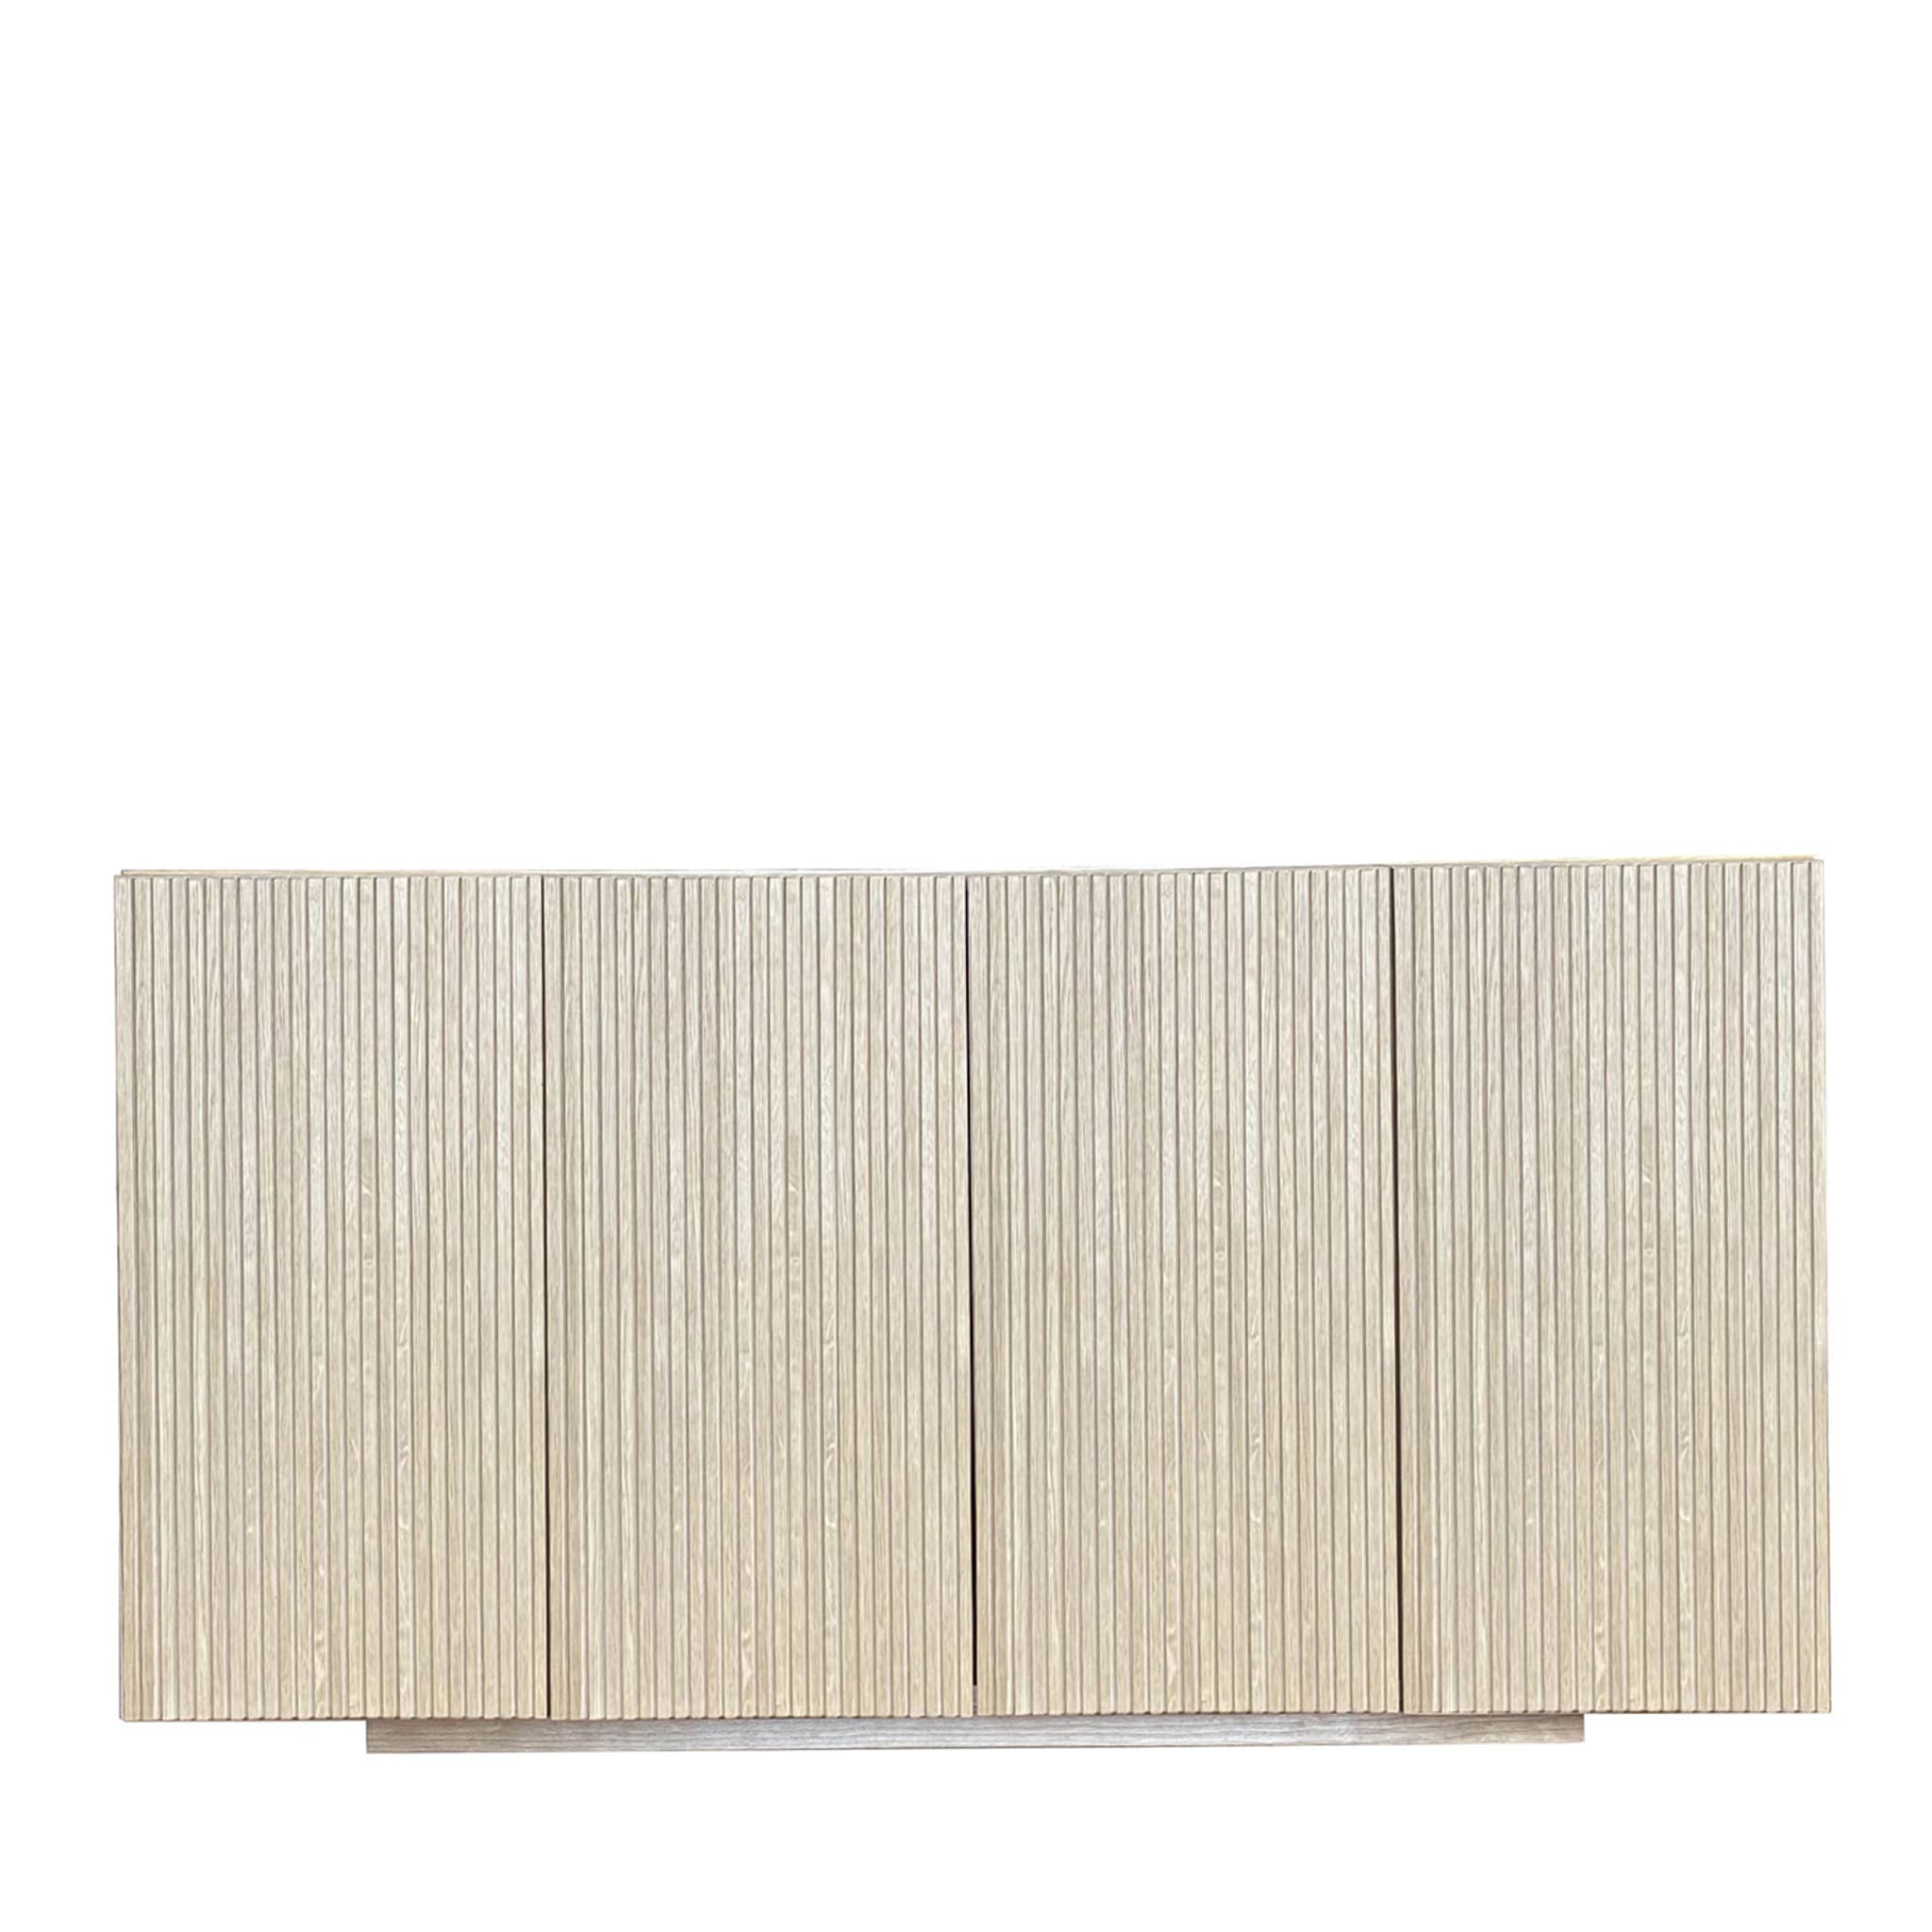 Boccadarno Nove 4-Door Grooved Sideboard by Meccani Studio - Main view